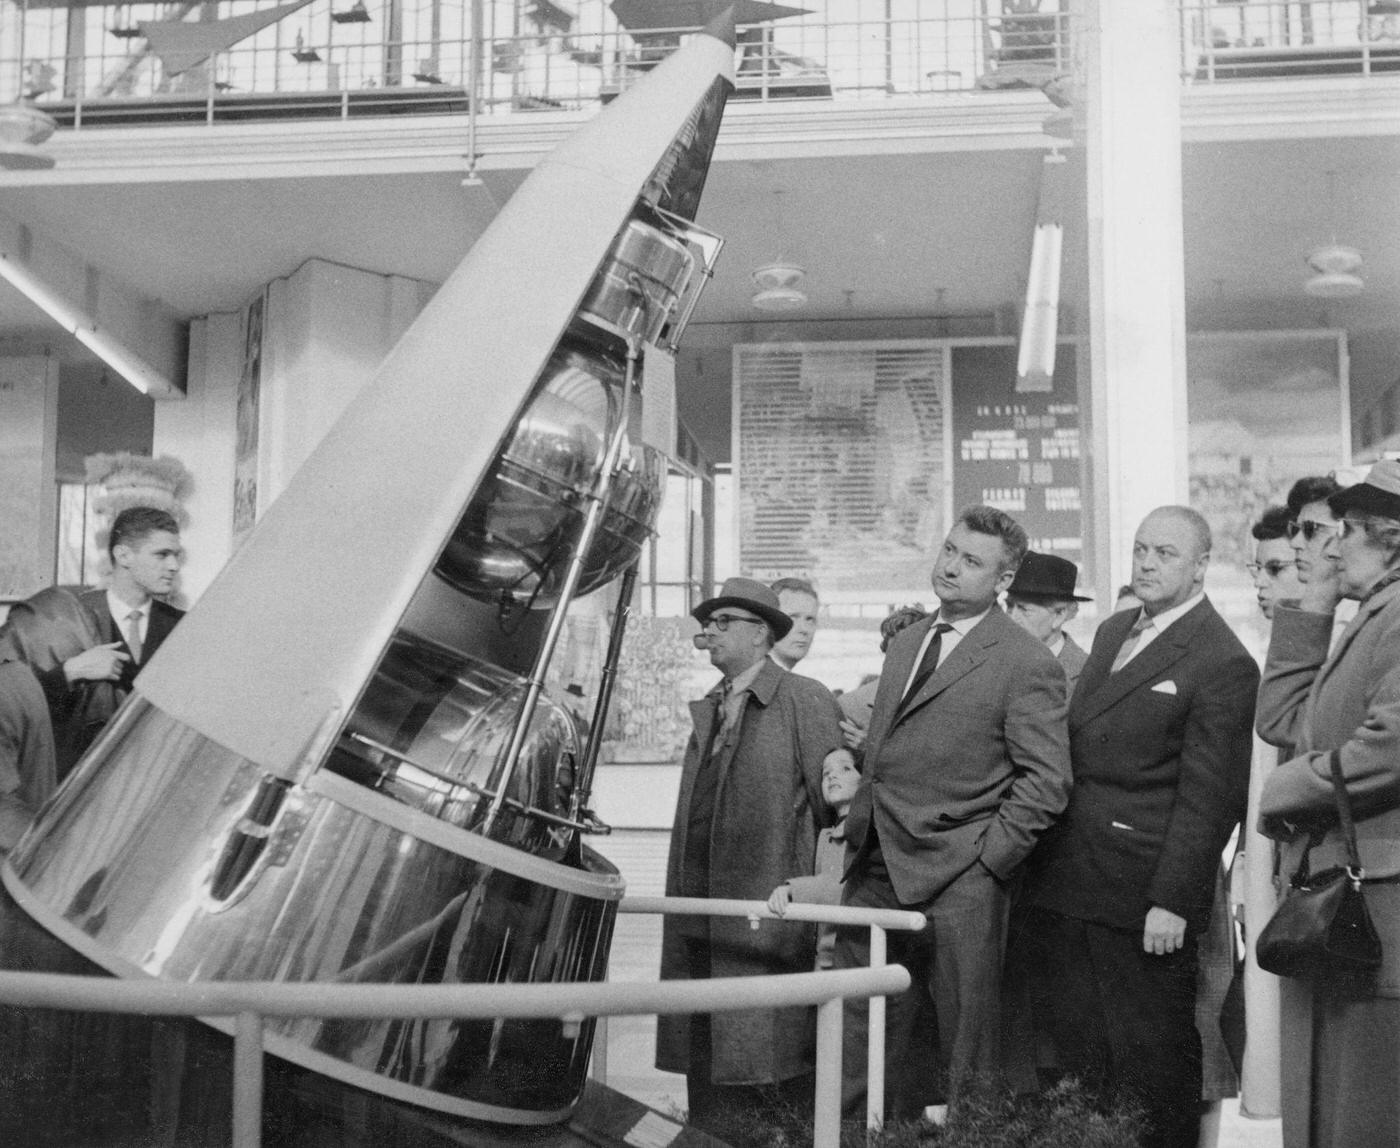 Expo 58, Brussels World's Fair